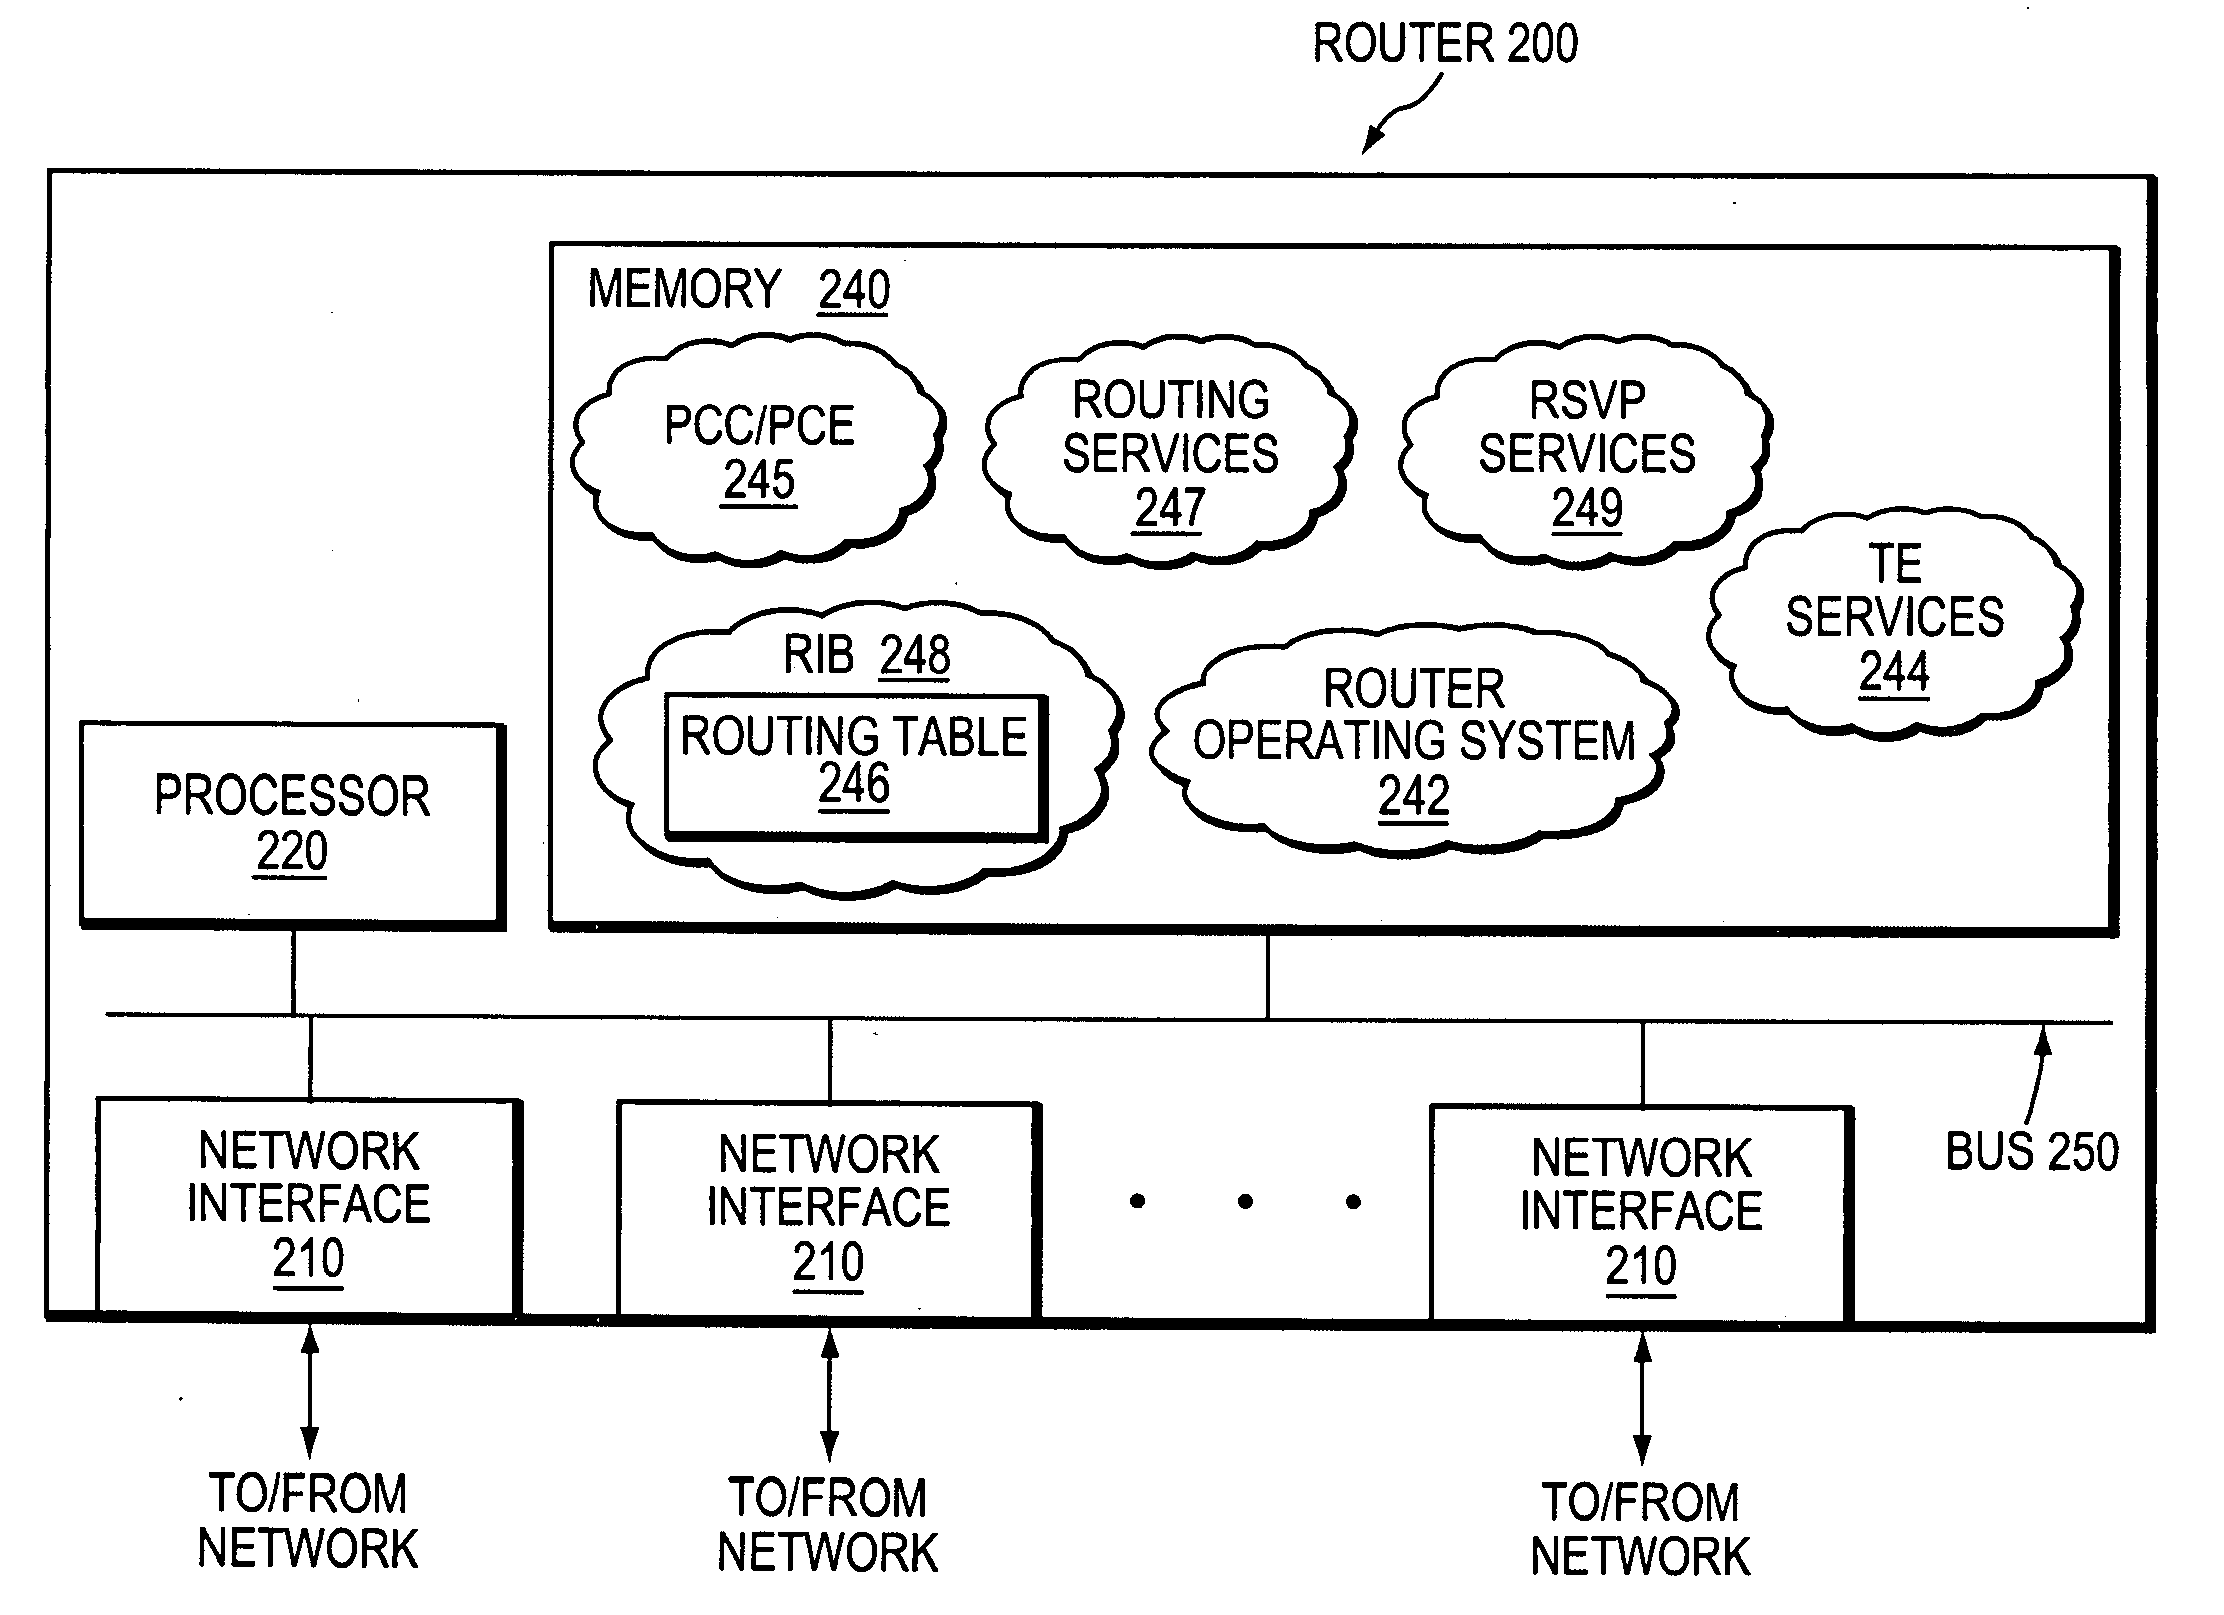 Inter-domain optimization trigger in PCE-based environment